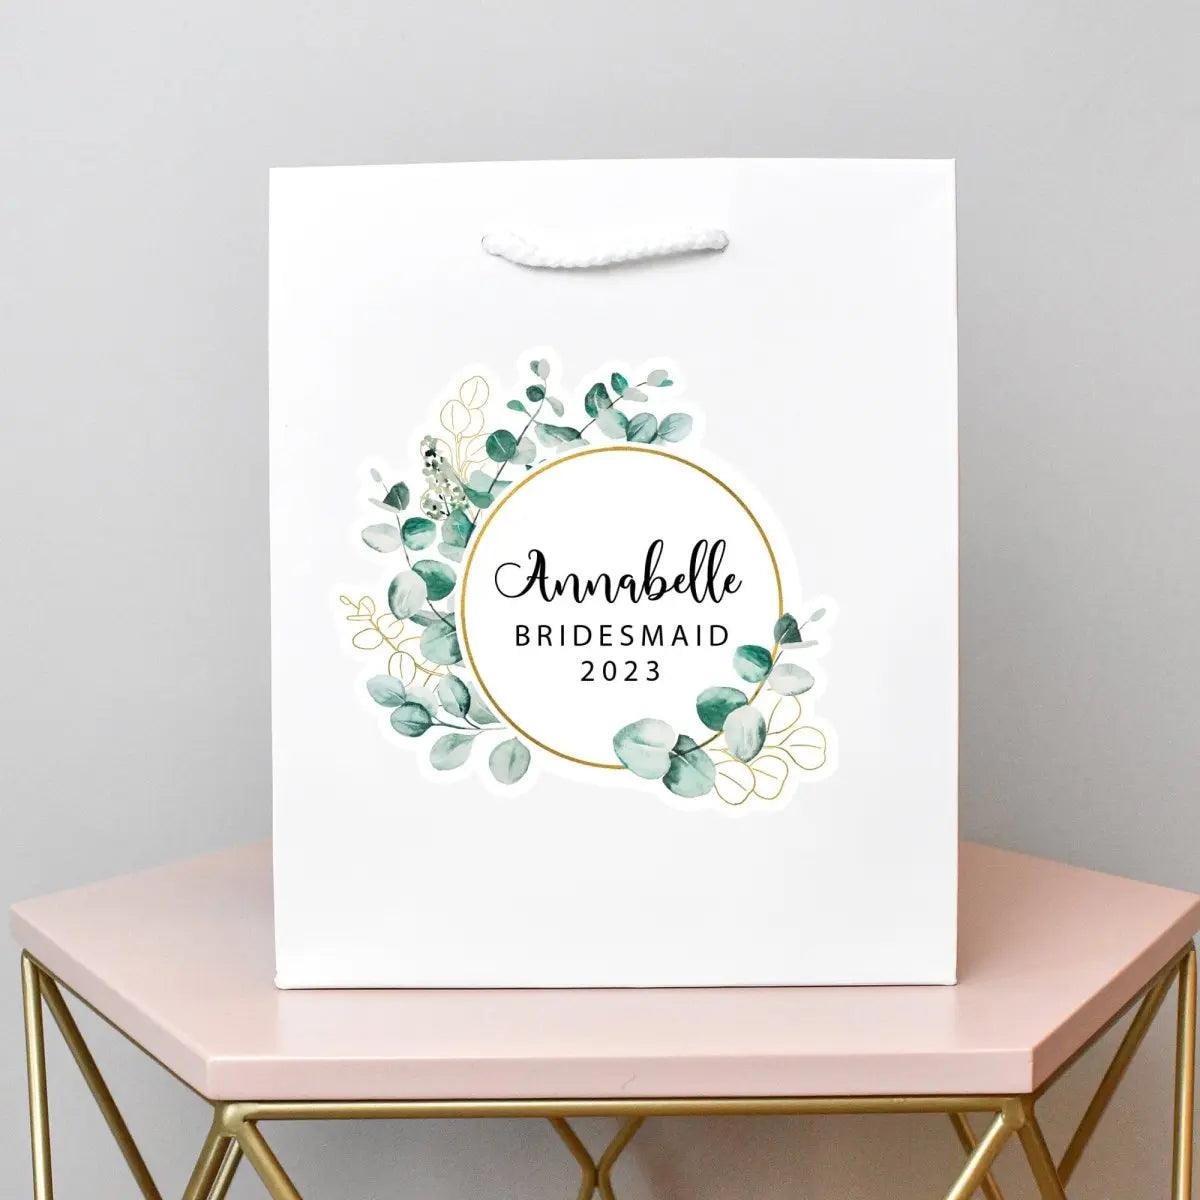 Personalised Bridesmaid Gift Bag, DIY Personalised Party Bag, Favour Bag, Floral Party Bags and Gifts, Gift Wrapping, Gift Bags, Hen Party - Amy Lucy